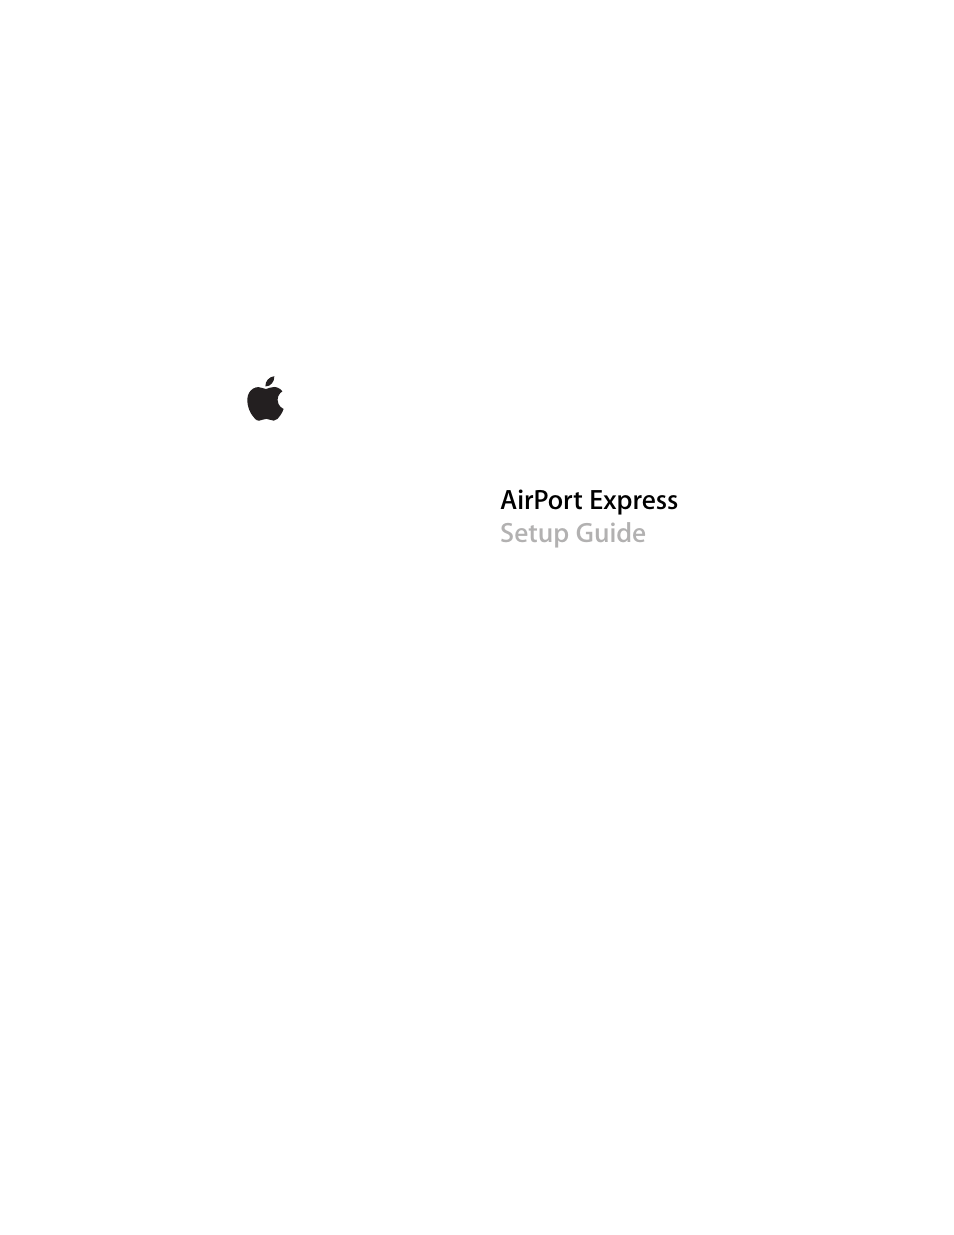 Apple AirPort 802.11n (1st Generation) | 48 pages